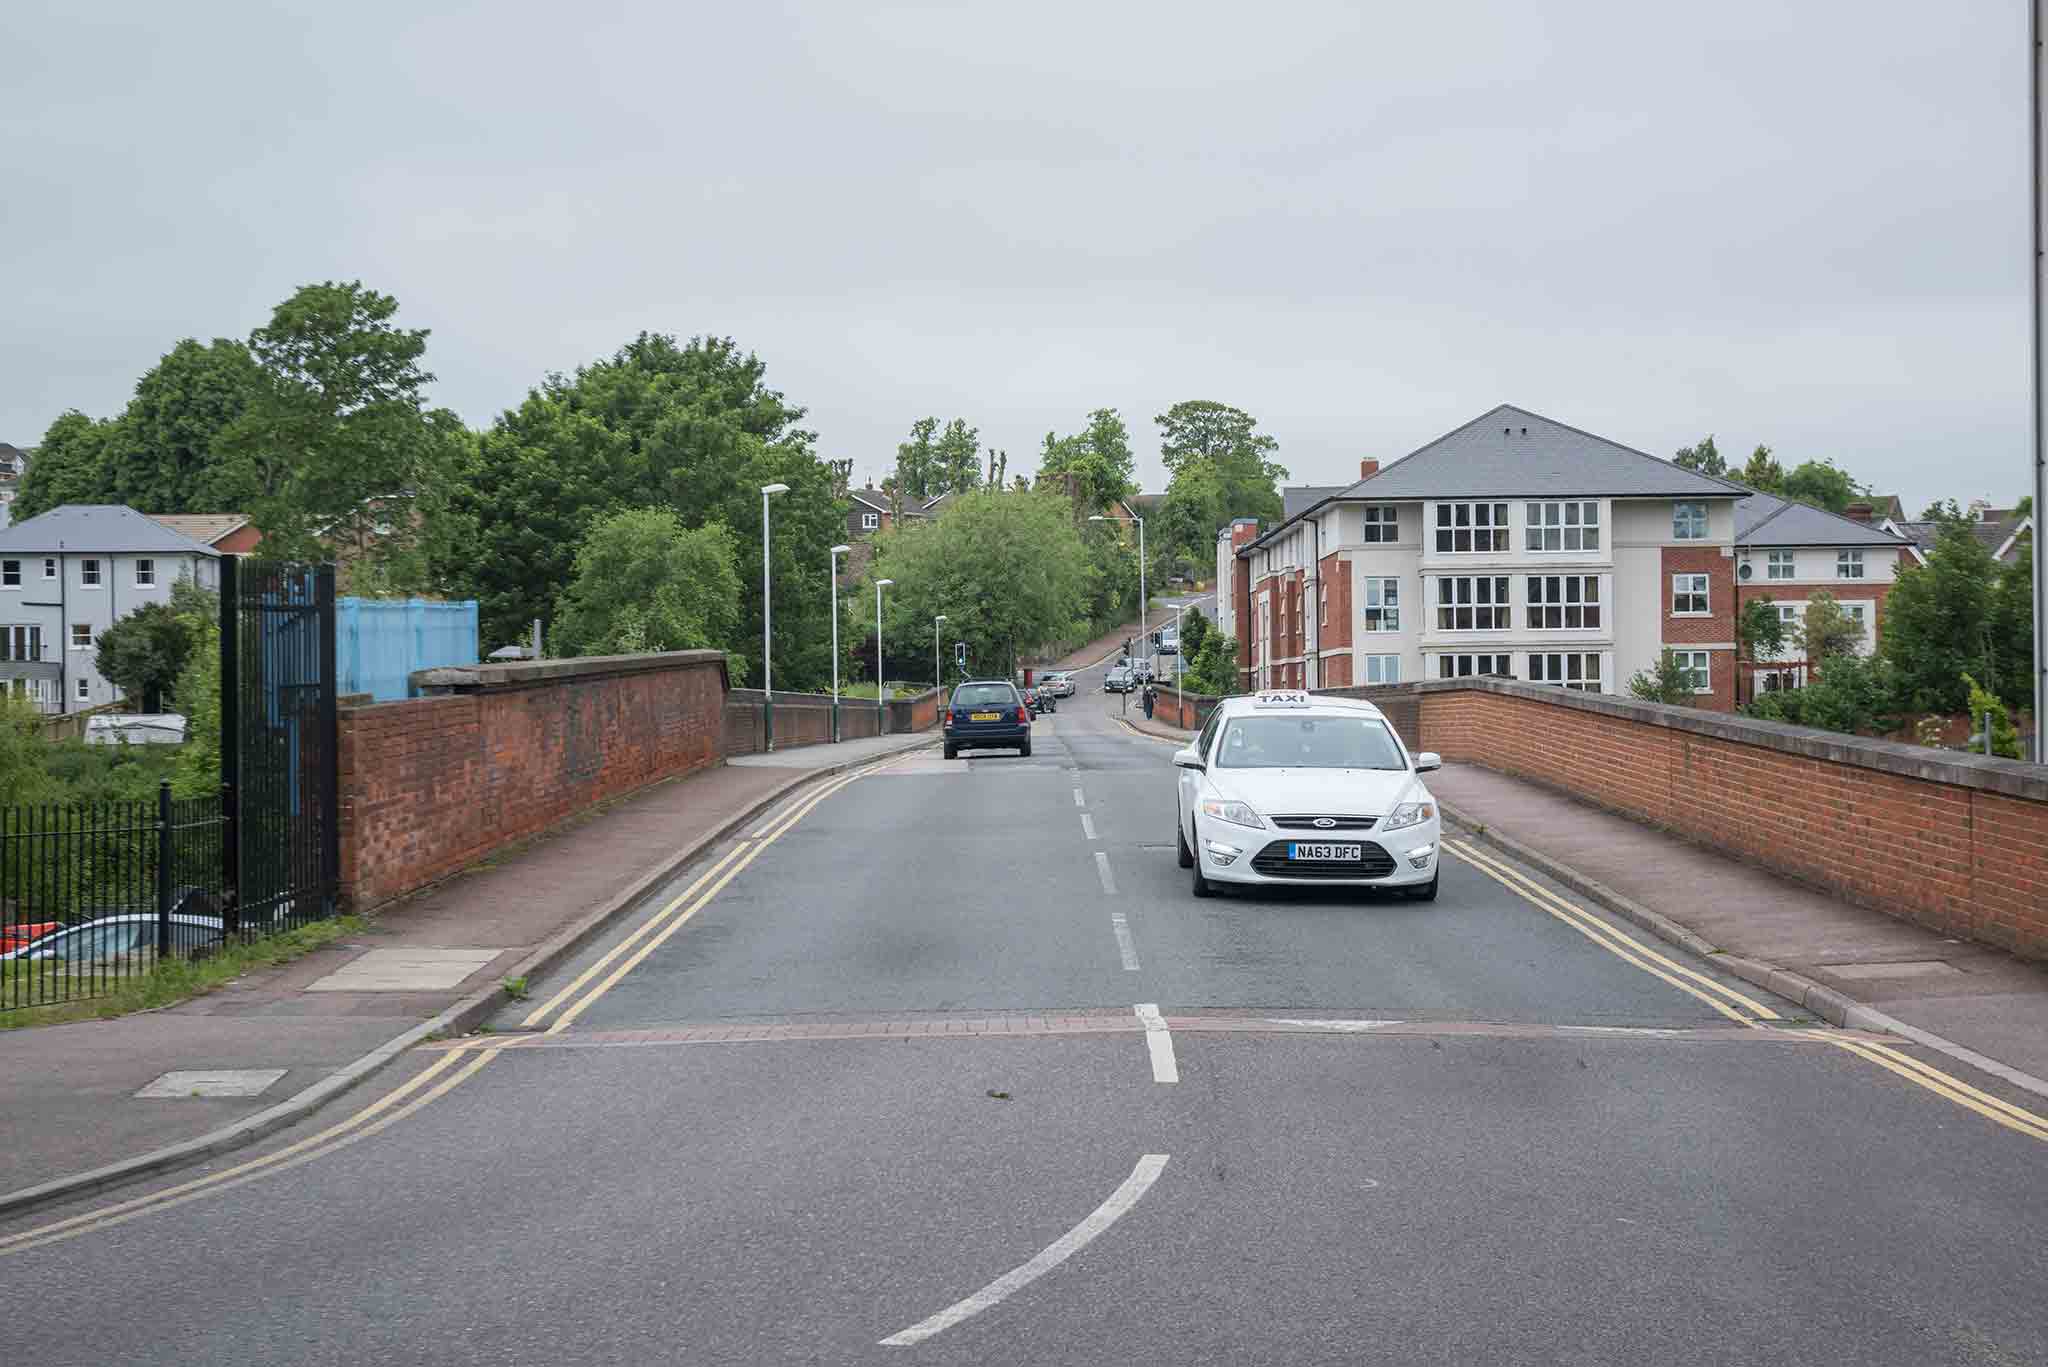 Grosvenor Bridge is to be reopened in August say KCC